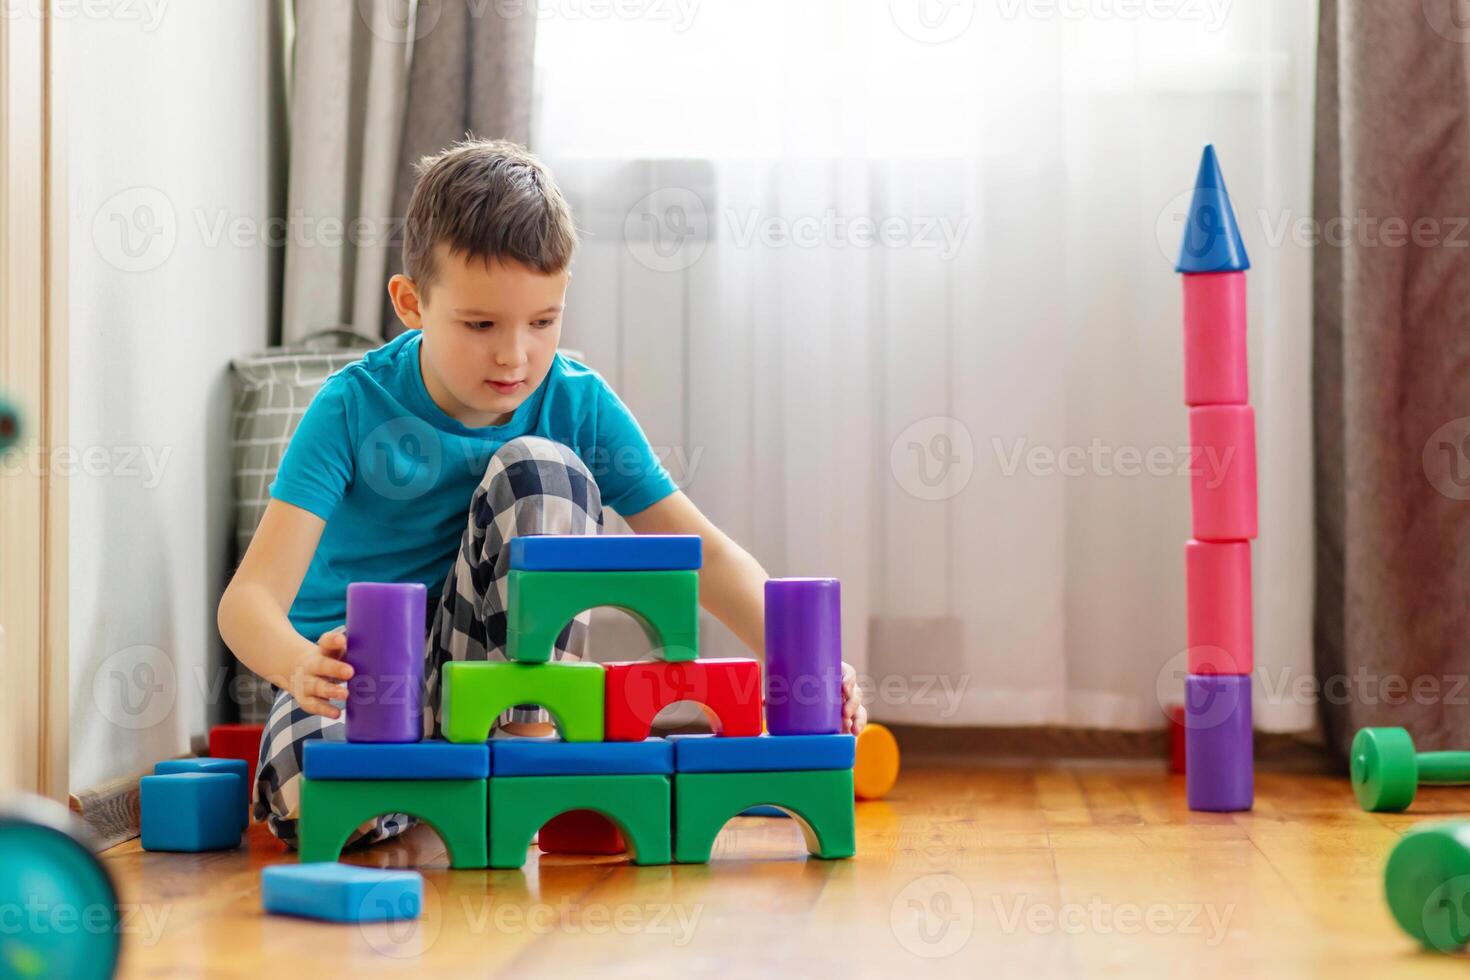 Cute little kid playing with colorful plastic toys or blocks photo